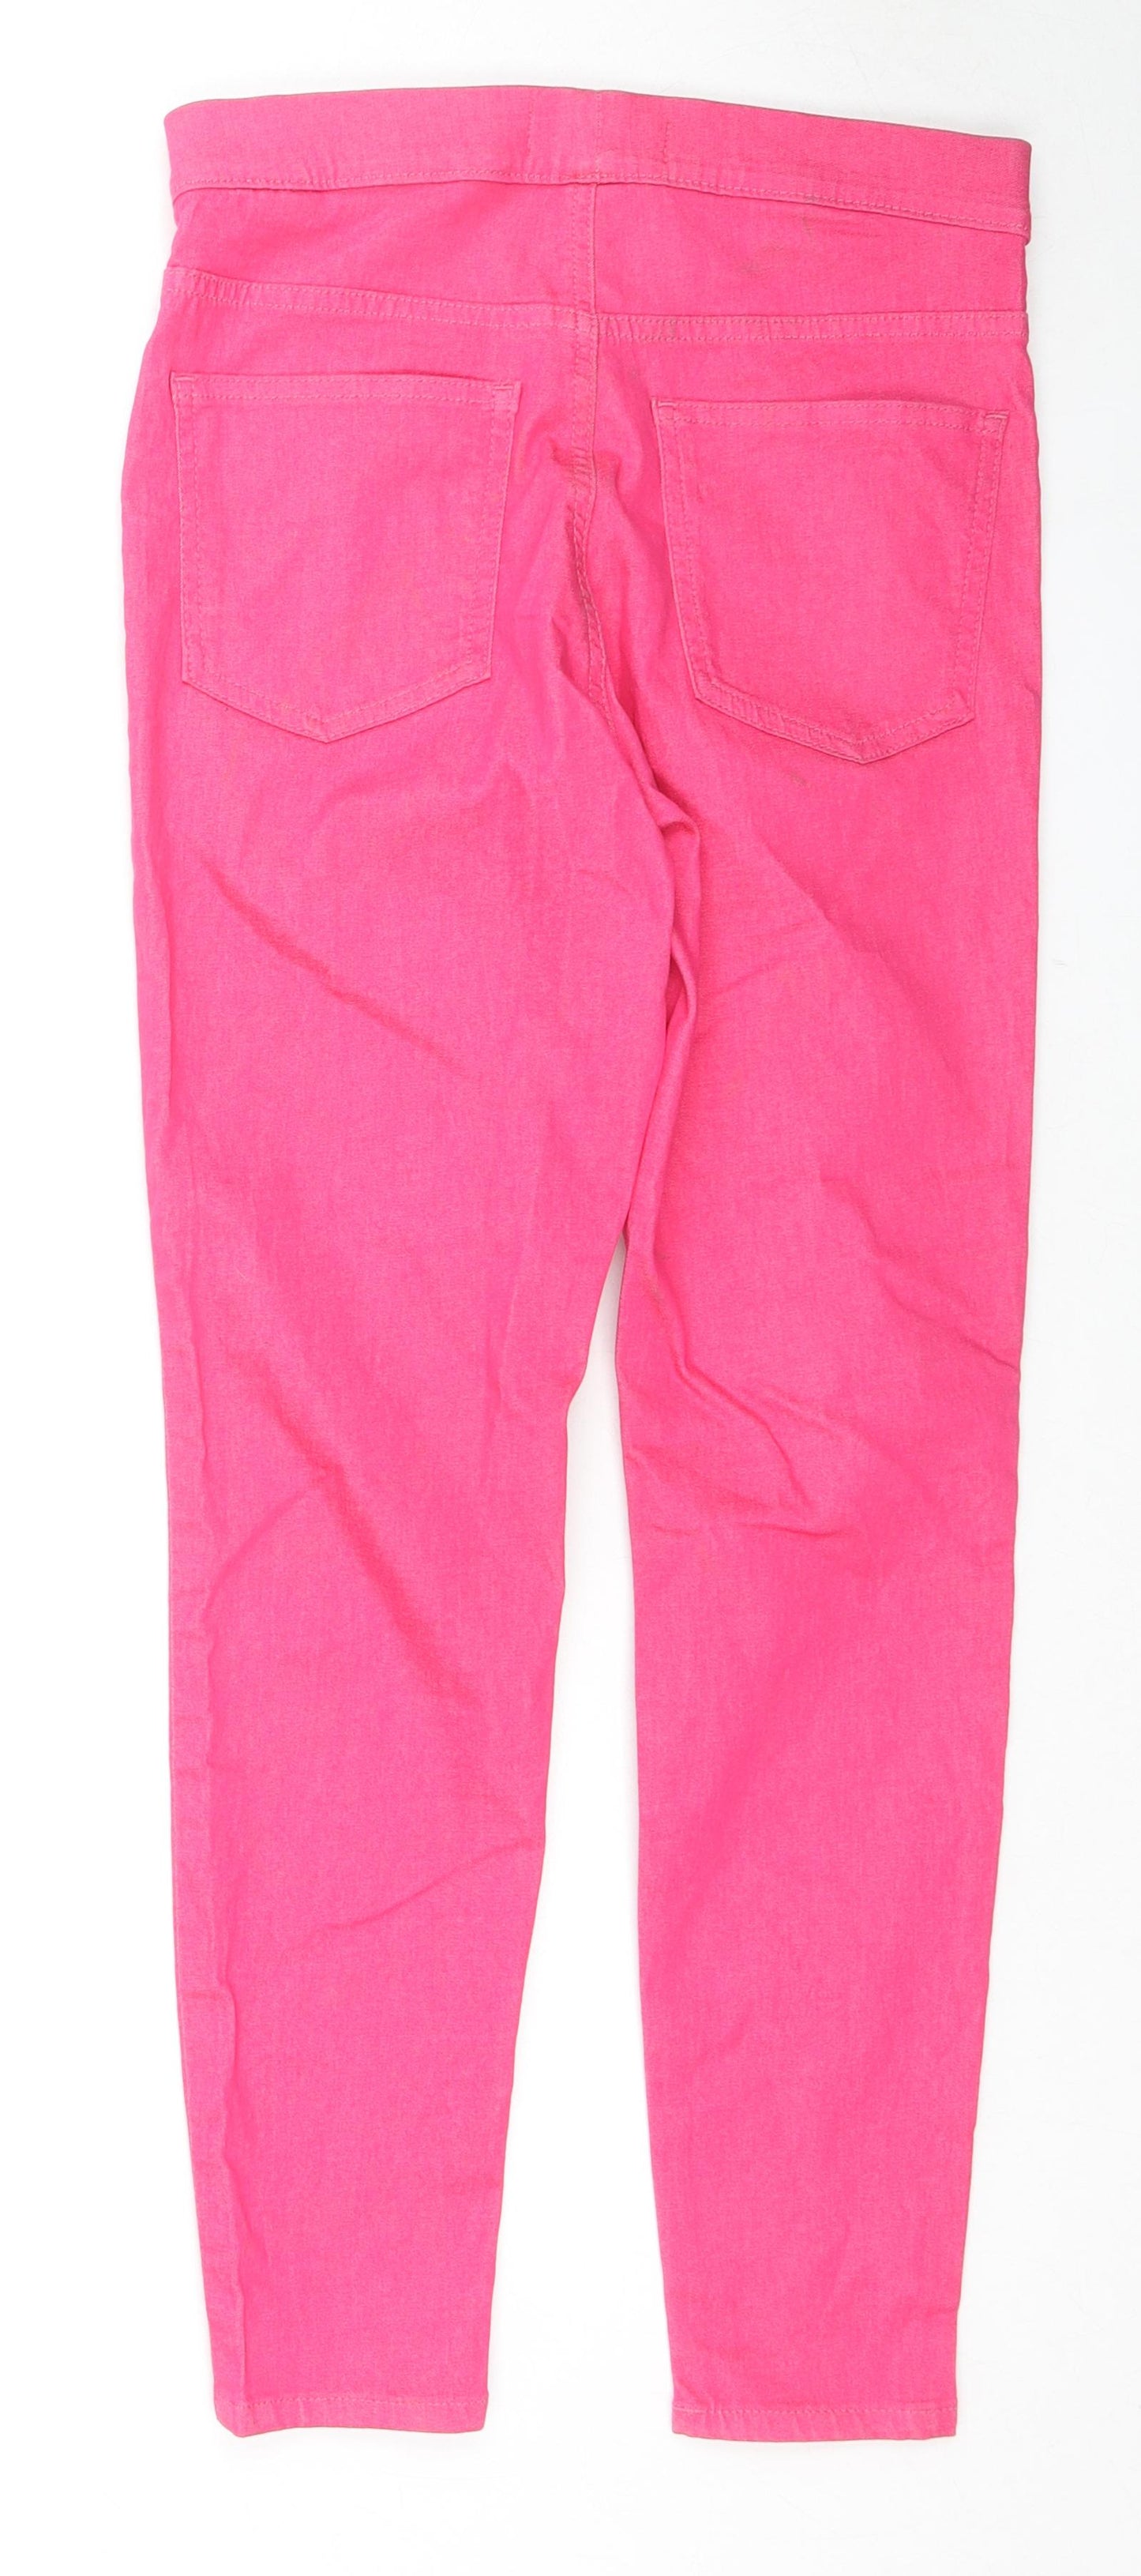 Marks and Spencer Womens Pink Cotton Jegging Jeans Size 10 L26 in Regular